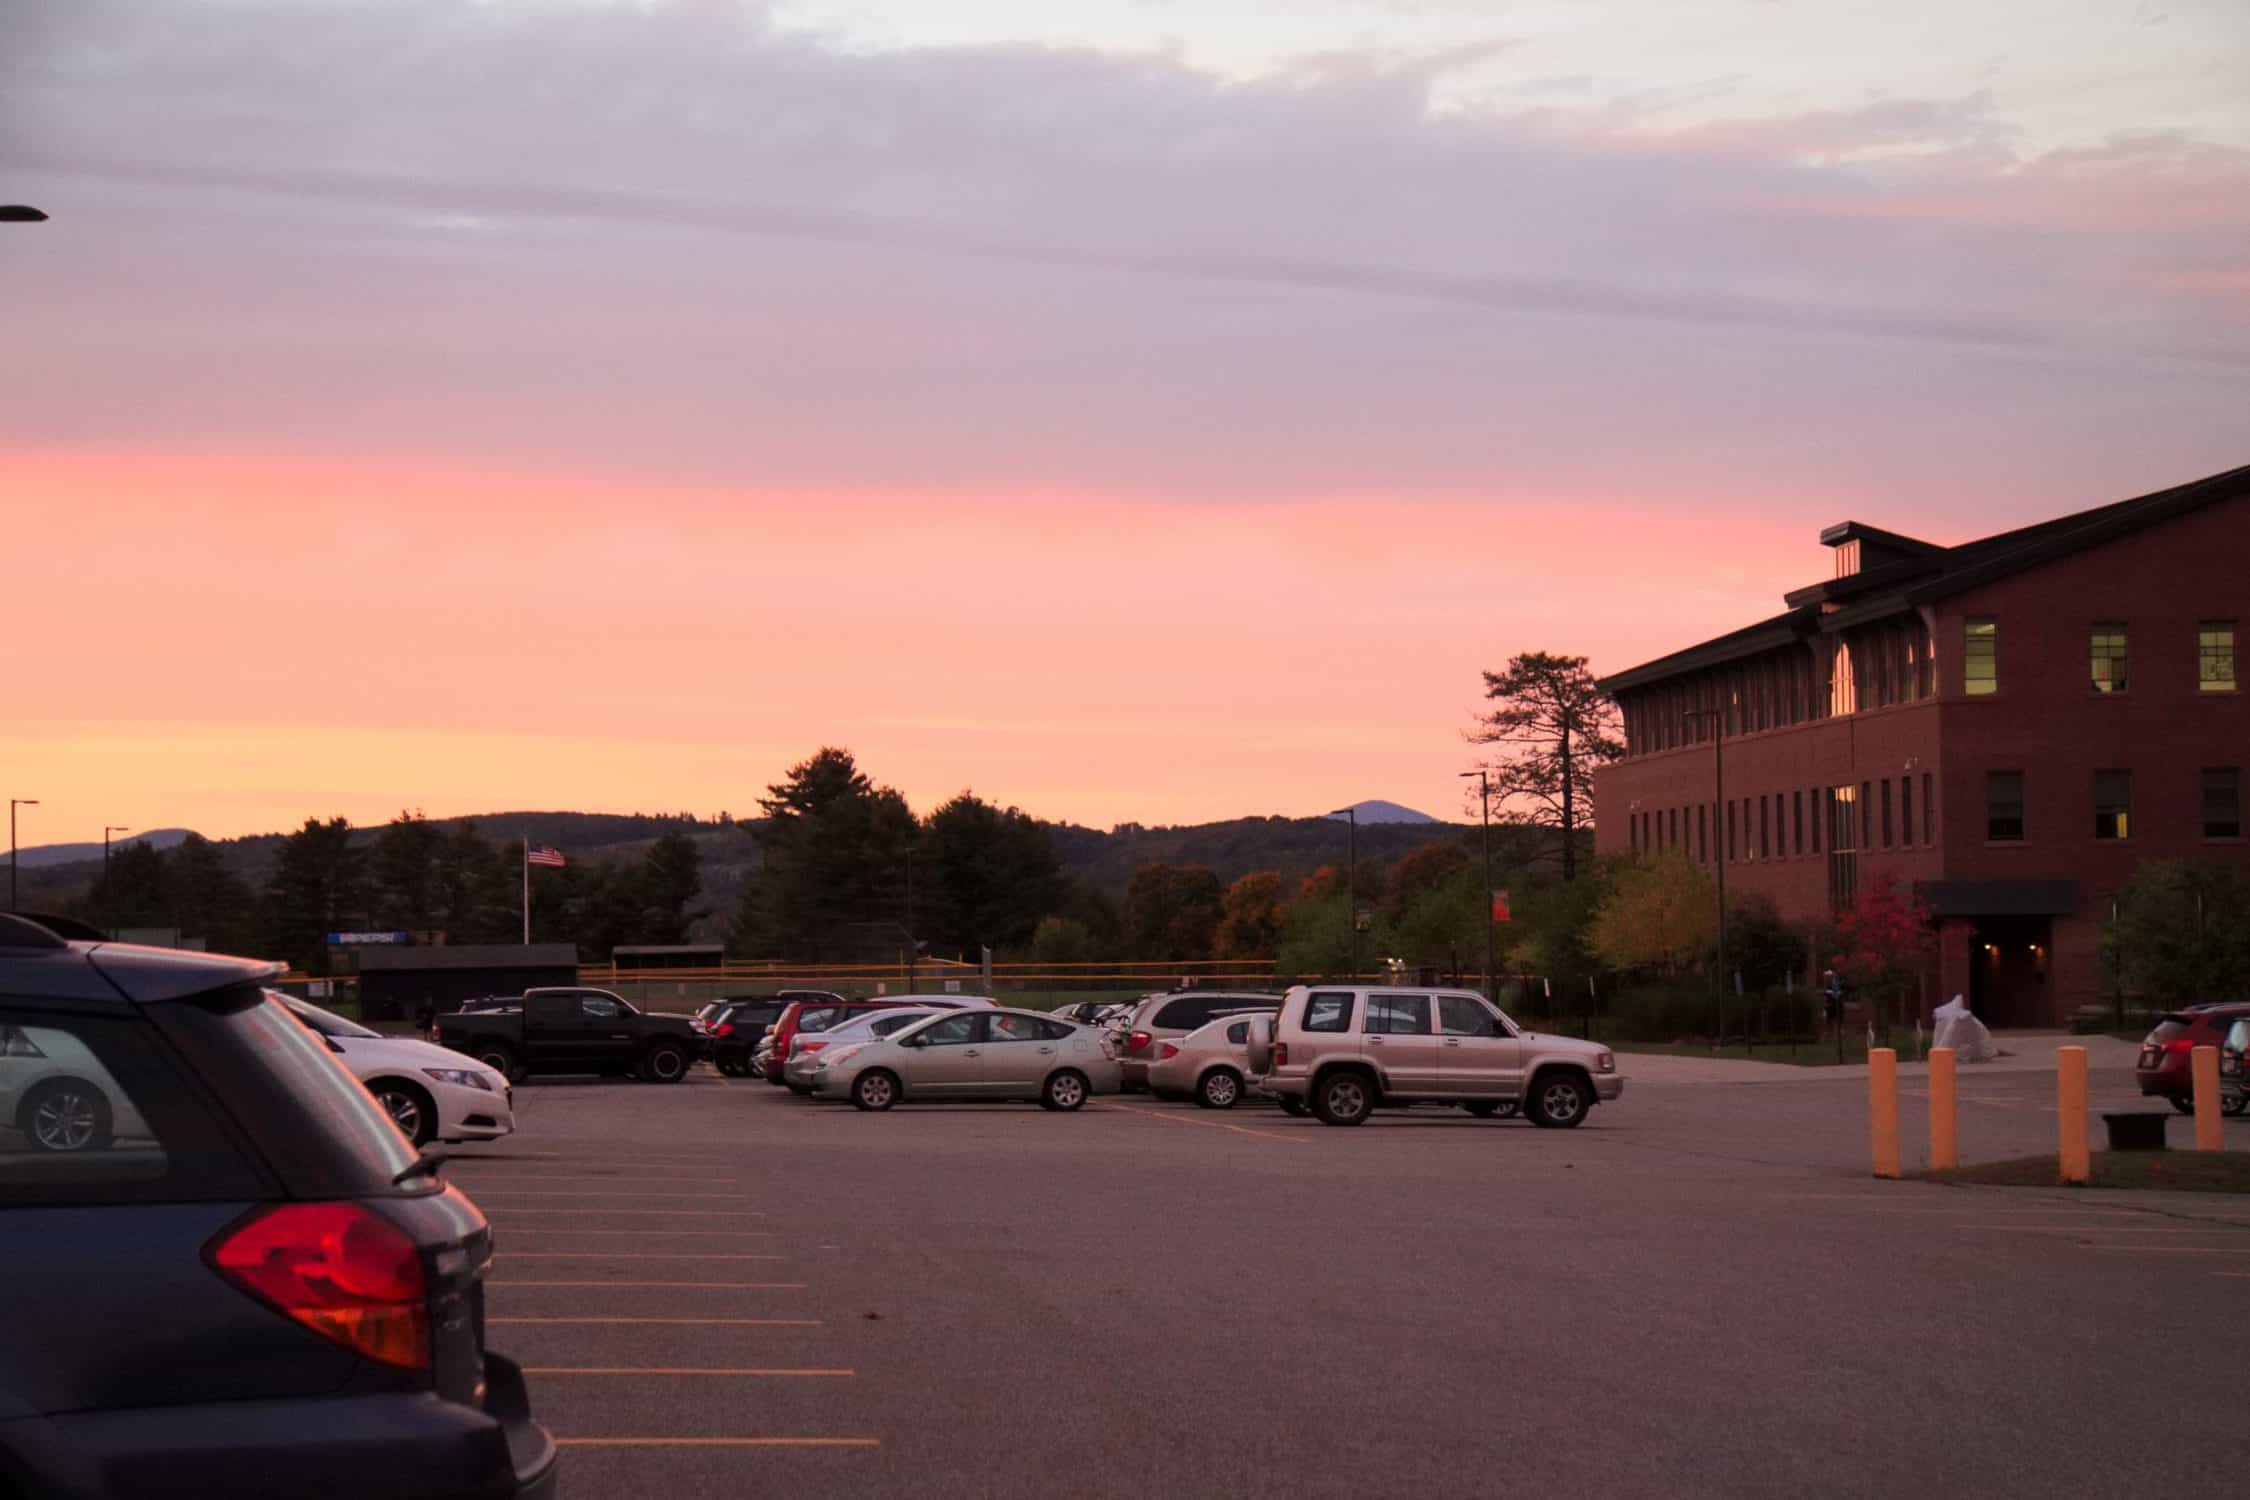 The sun sets over the parking lot outside the main entrance